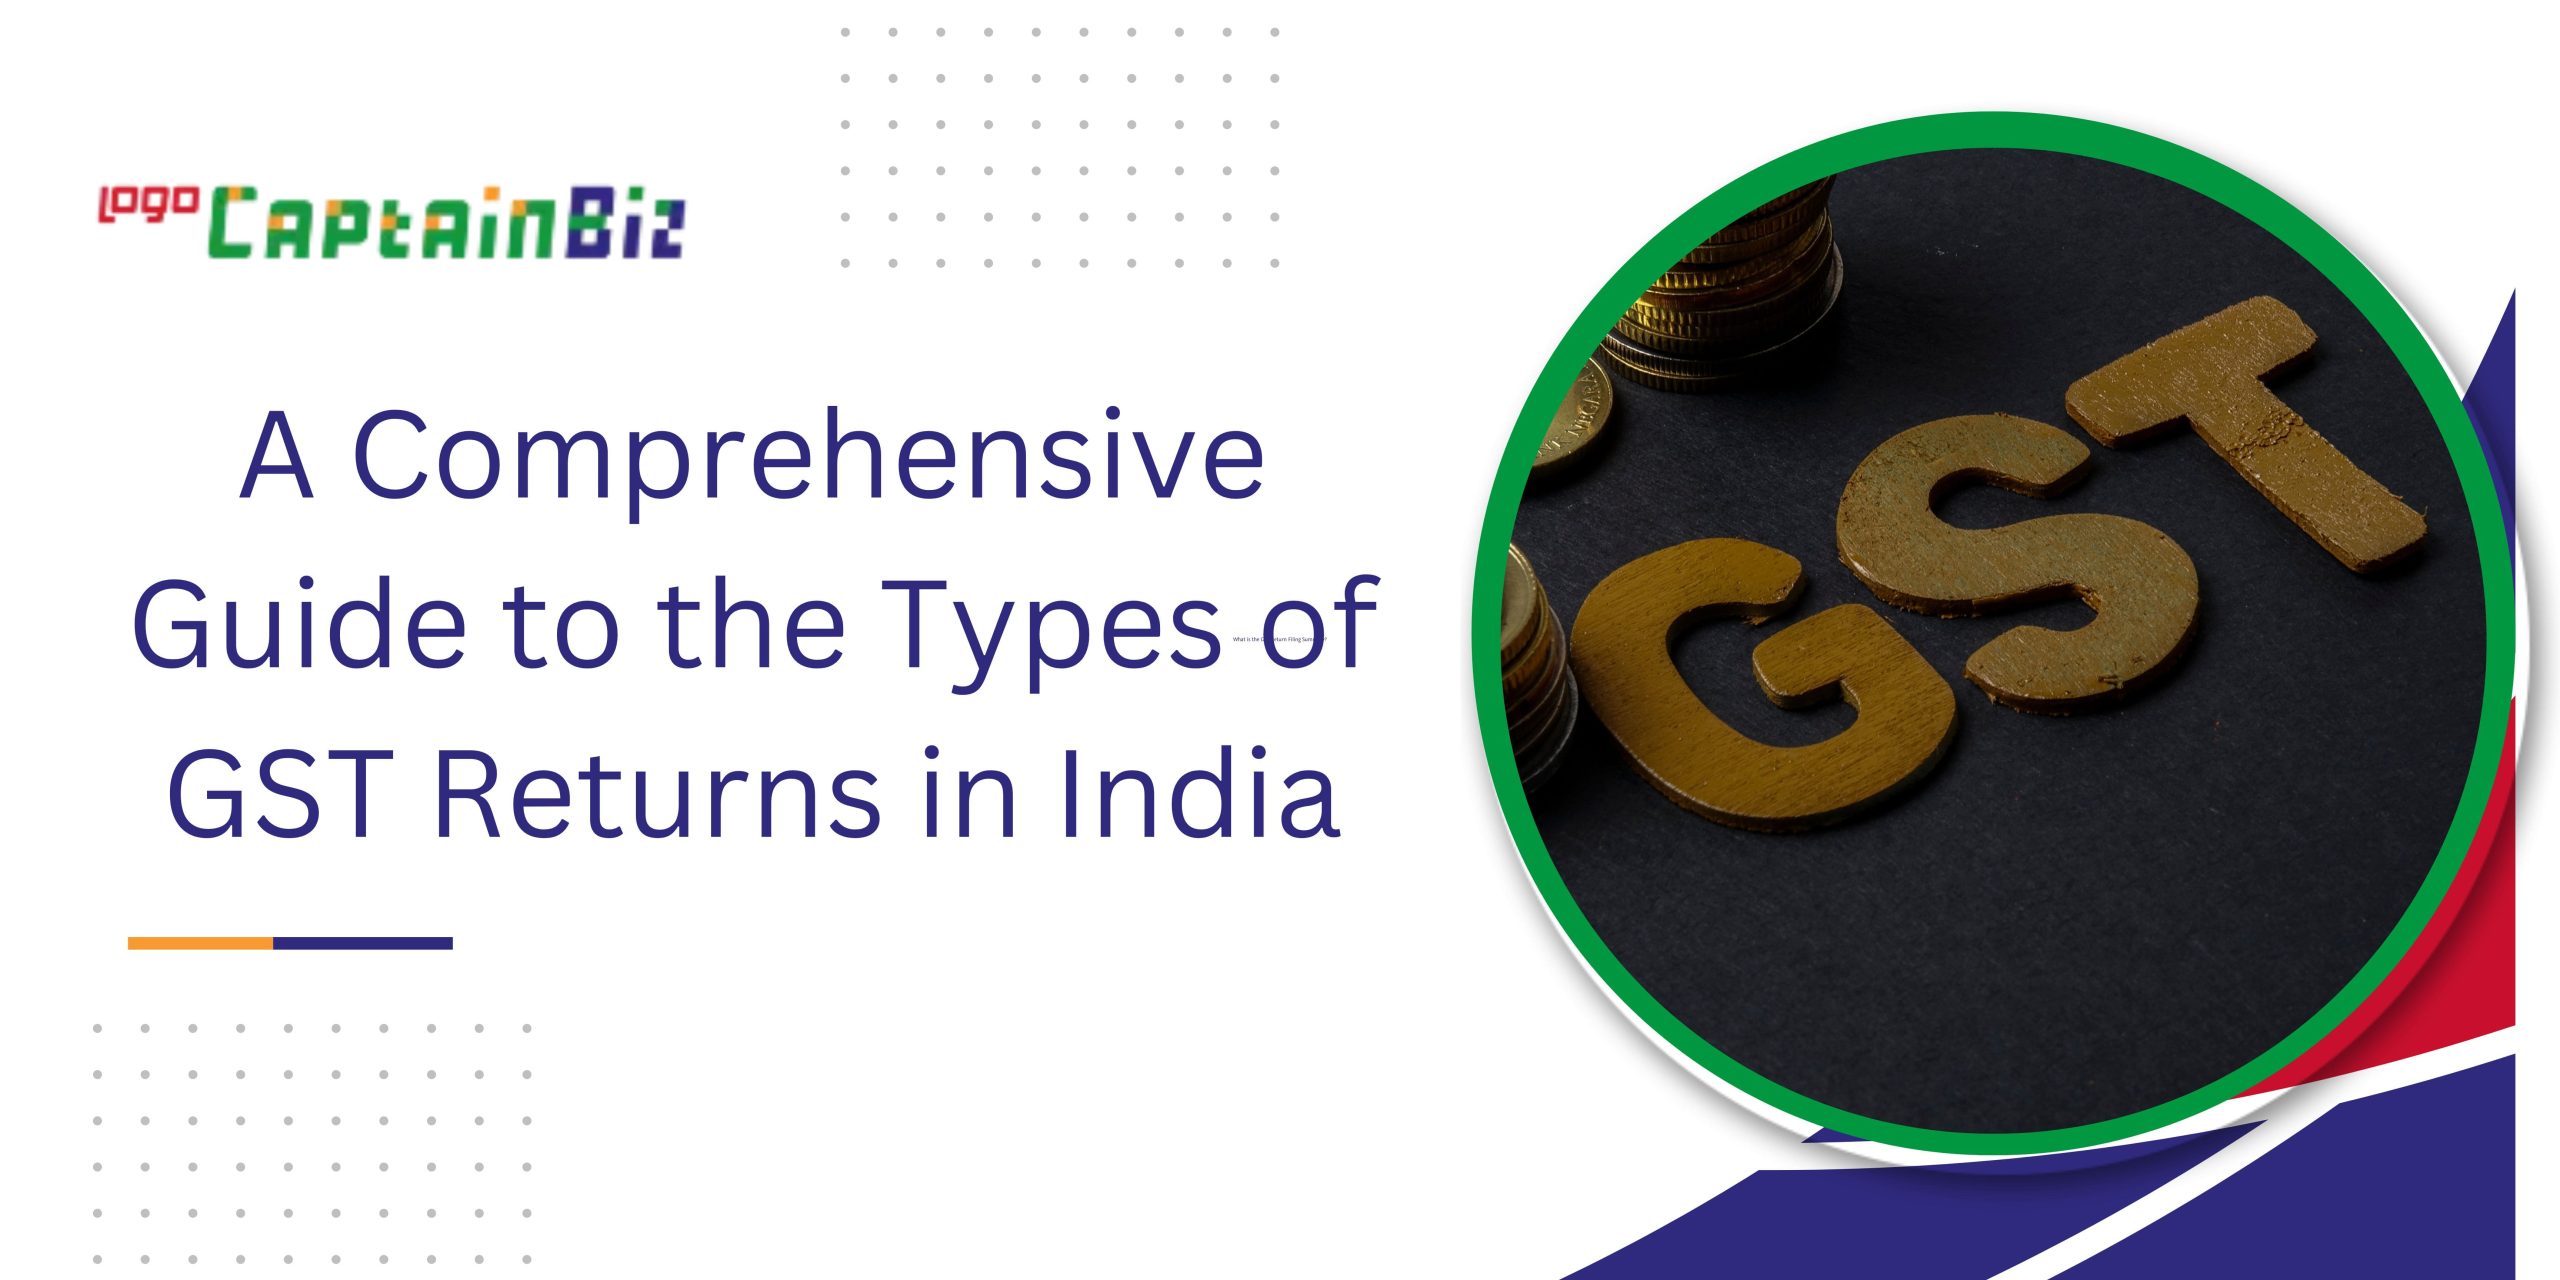 captainbiz a comprehensive guide to the types of gst returns in india